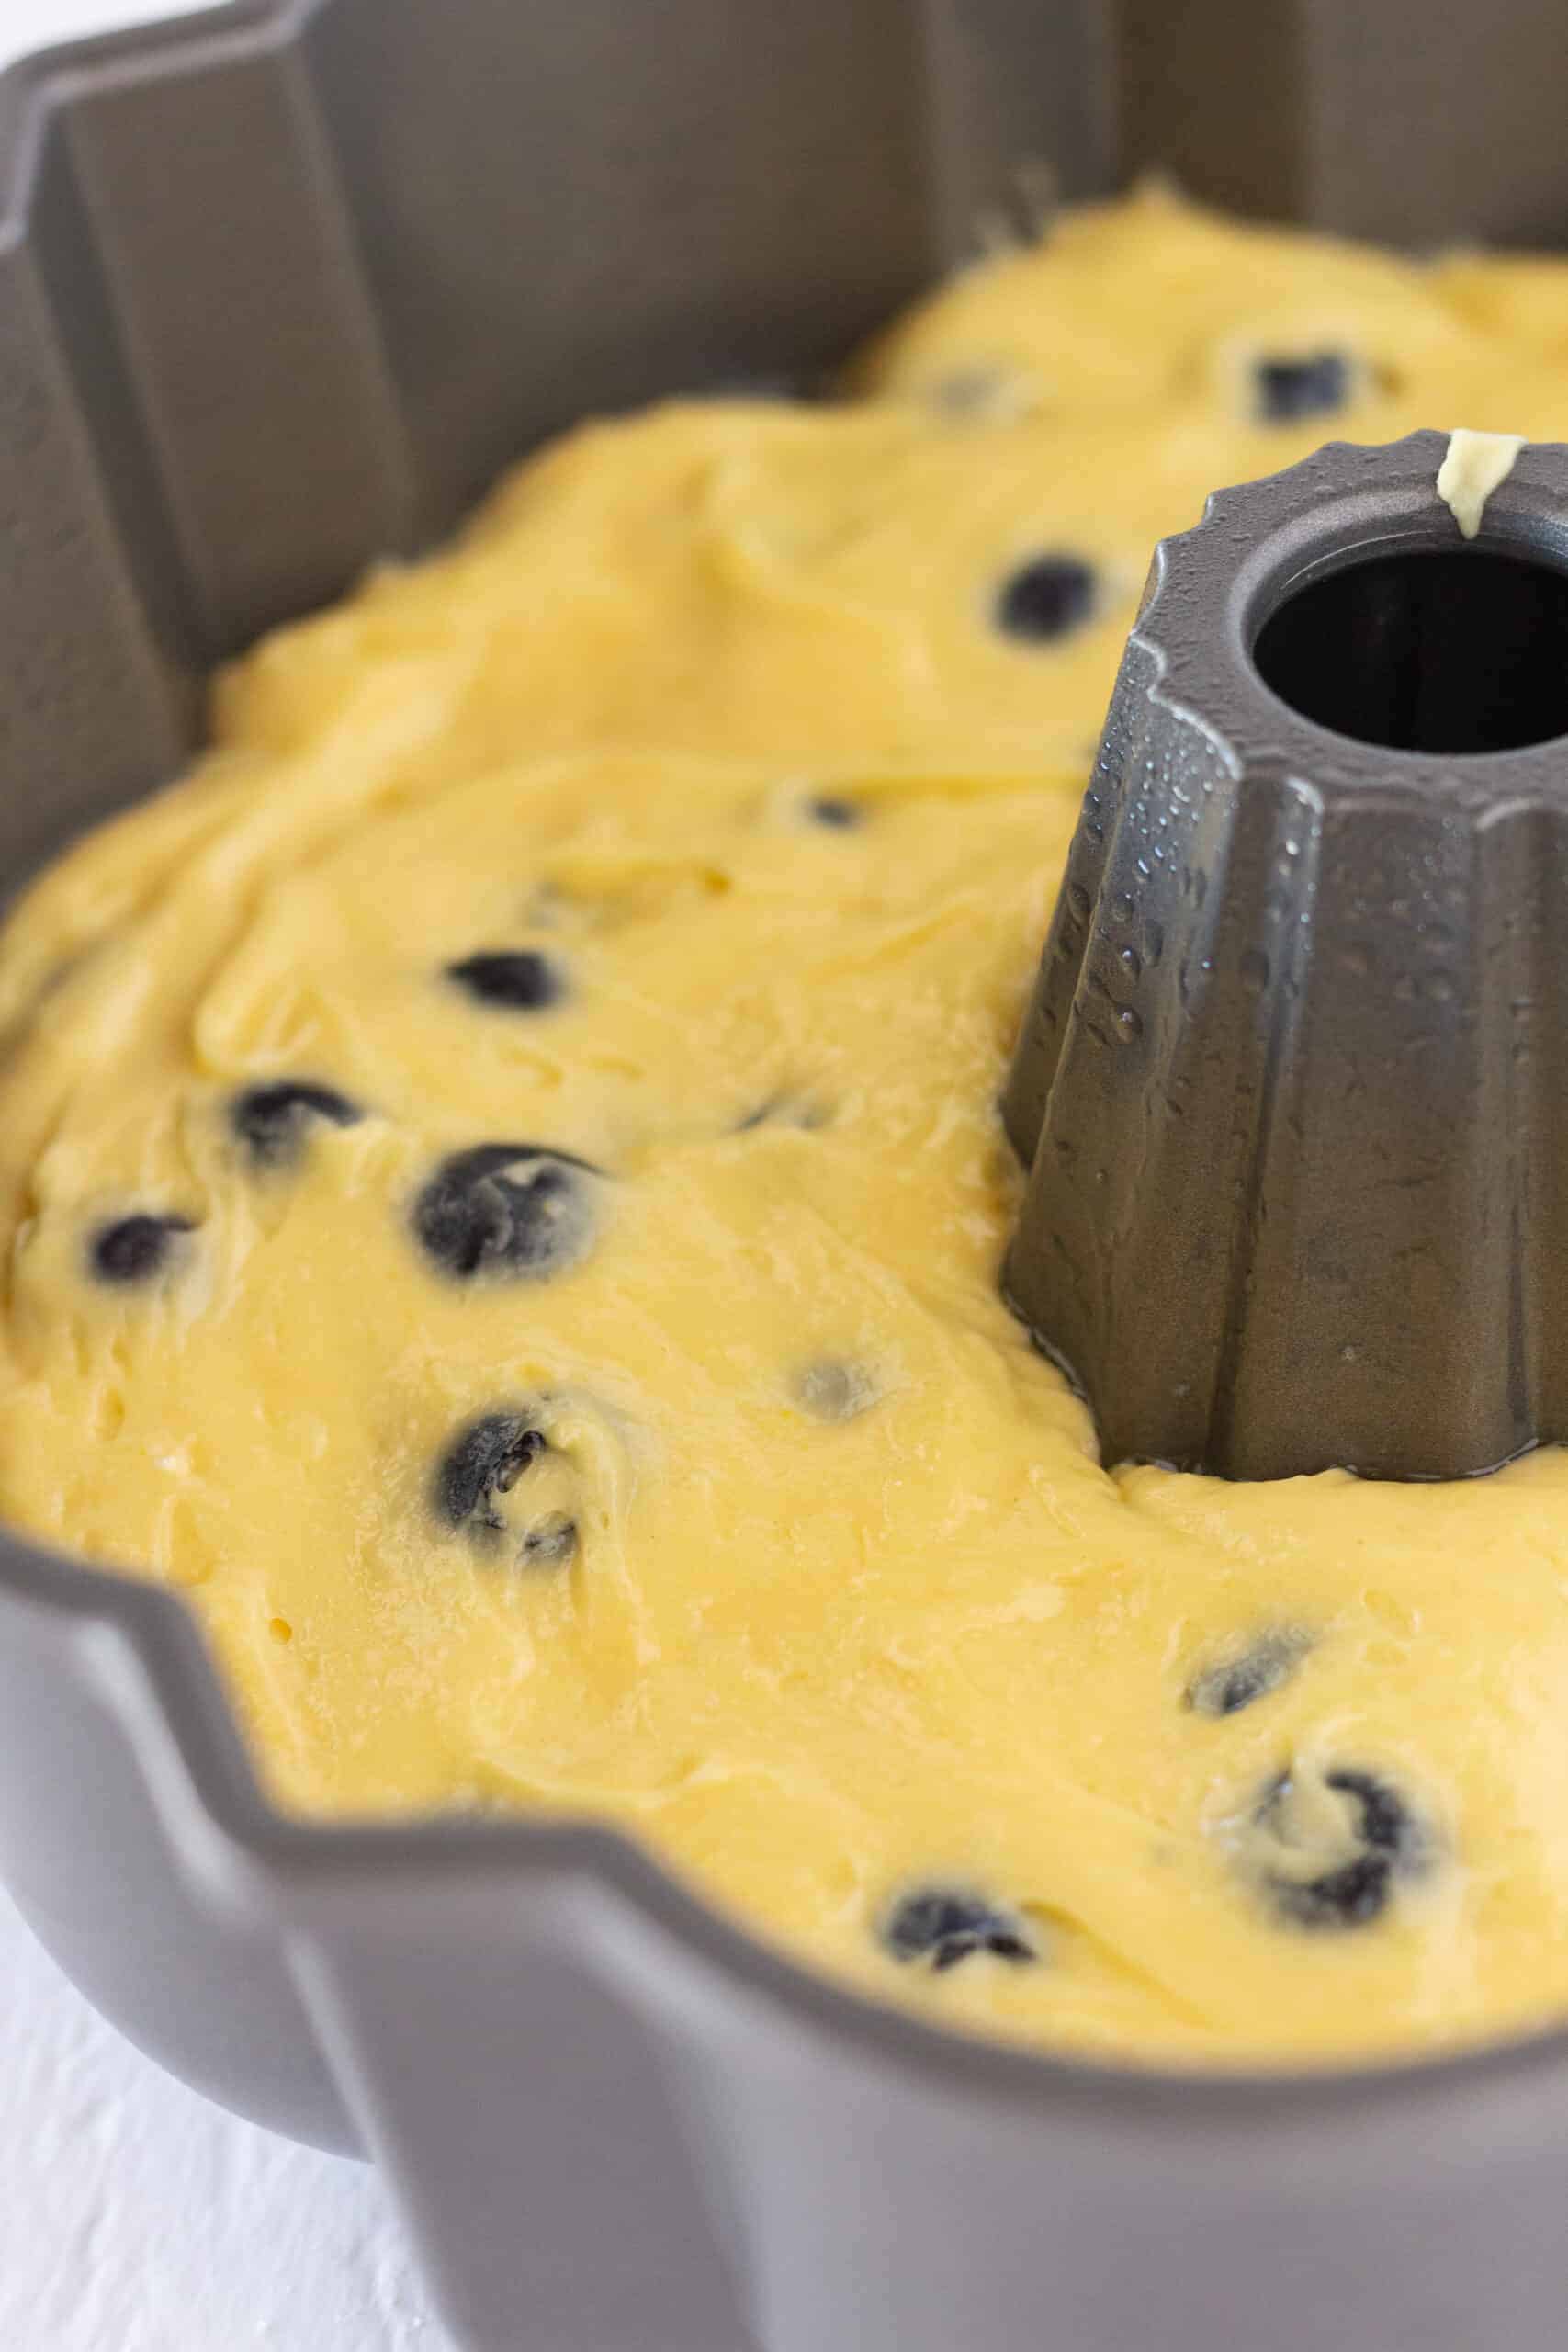 Blueberry Bundt Cake with a Cake Mix featured by top US dessert blogger, Practically Homemade